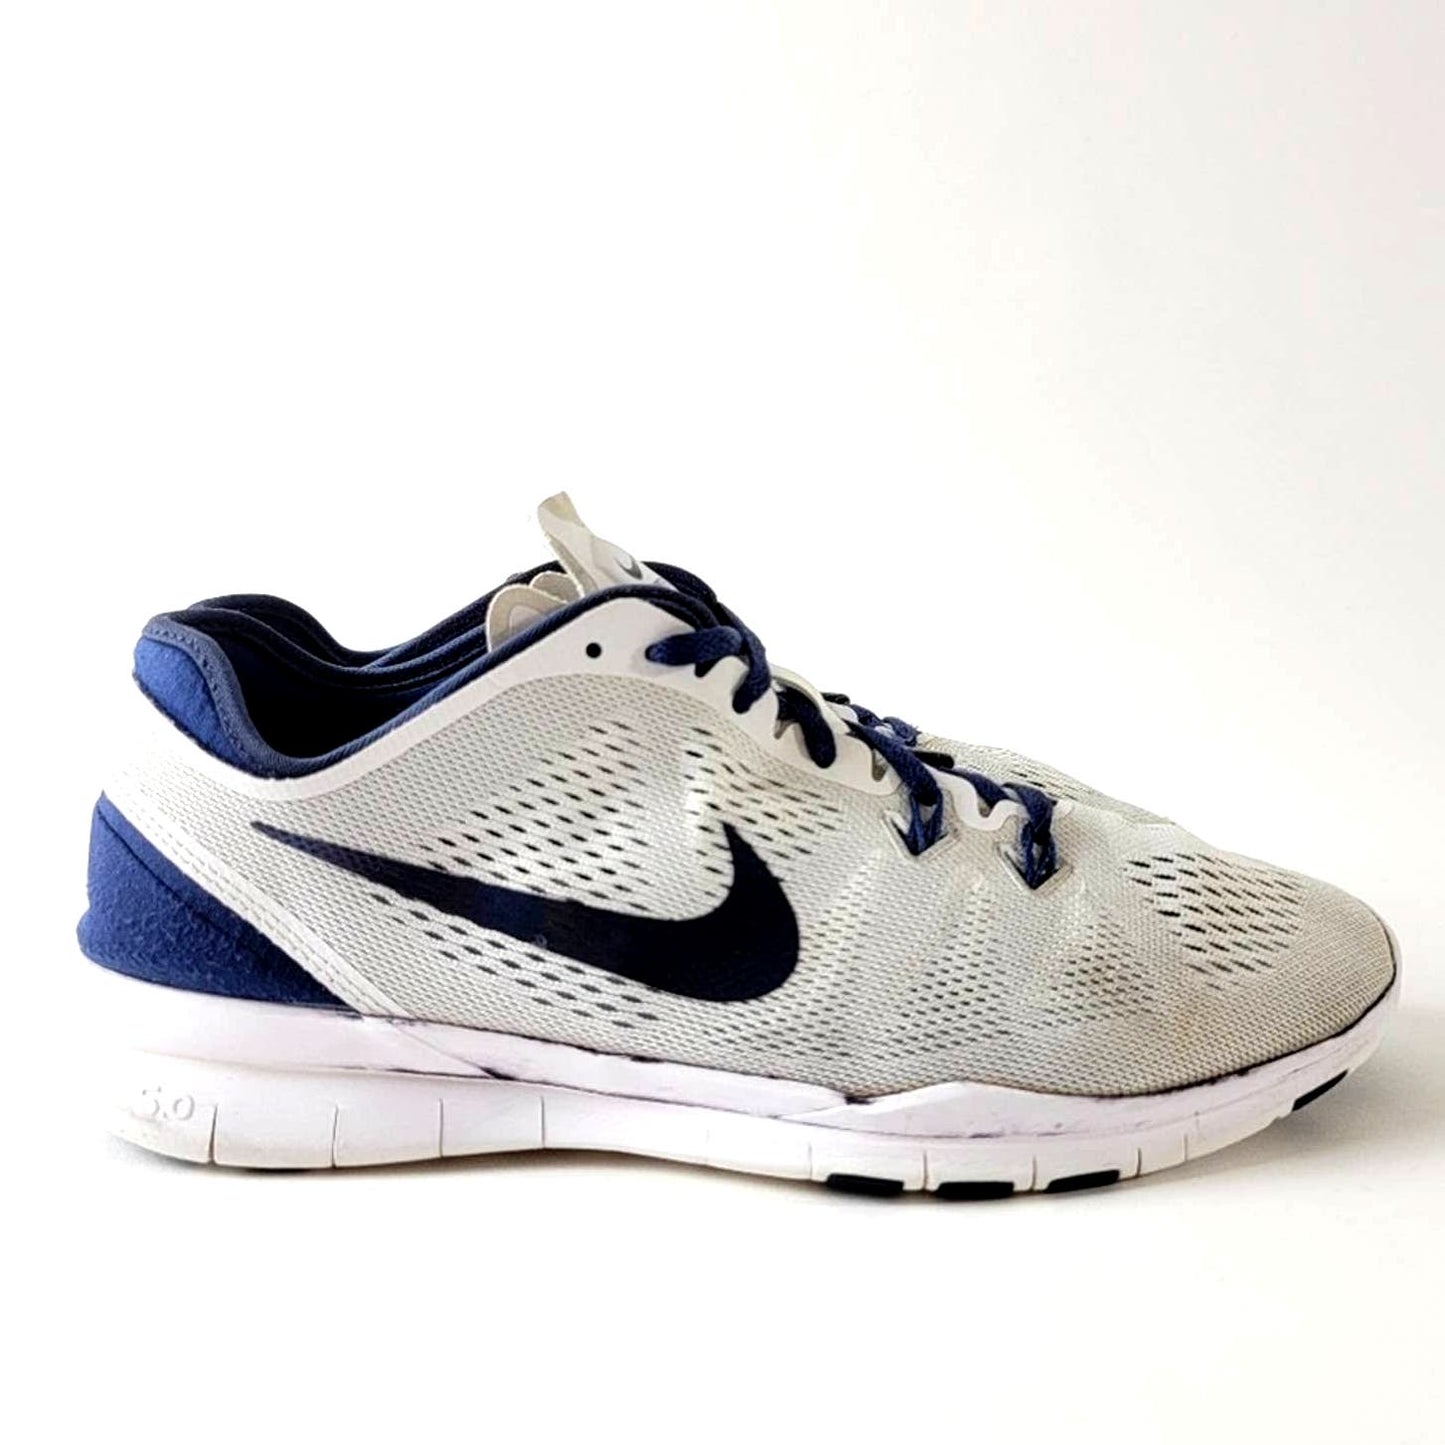 NIKE Free TR 5.0 Fit 4 Running Shoes - 9.5